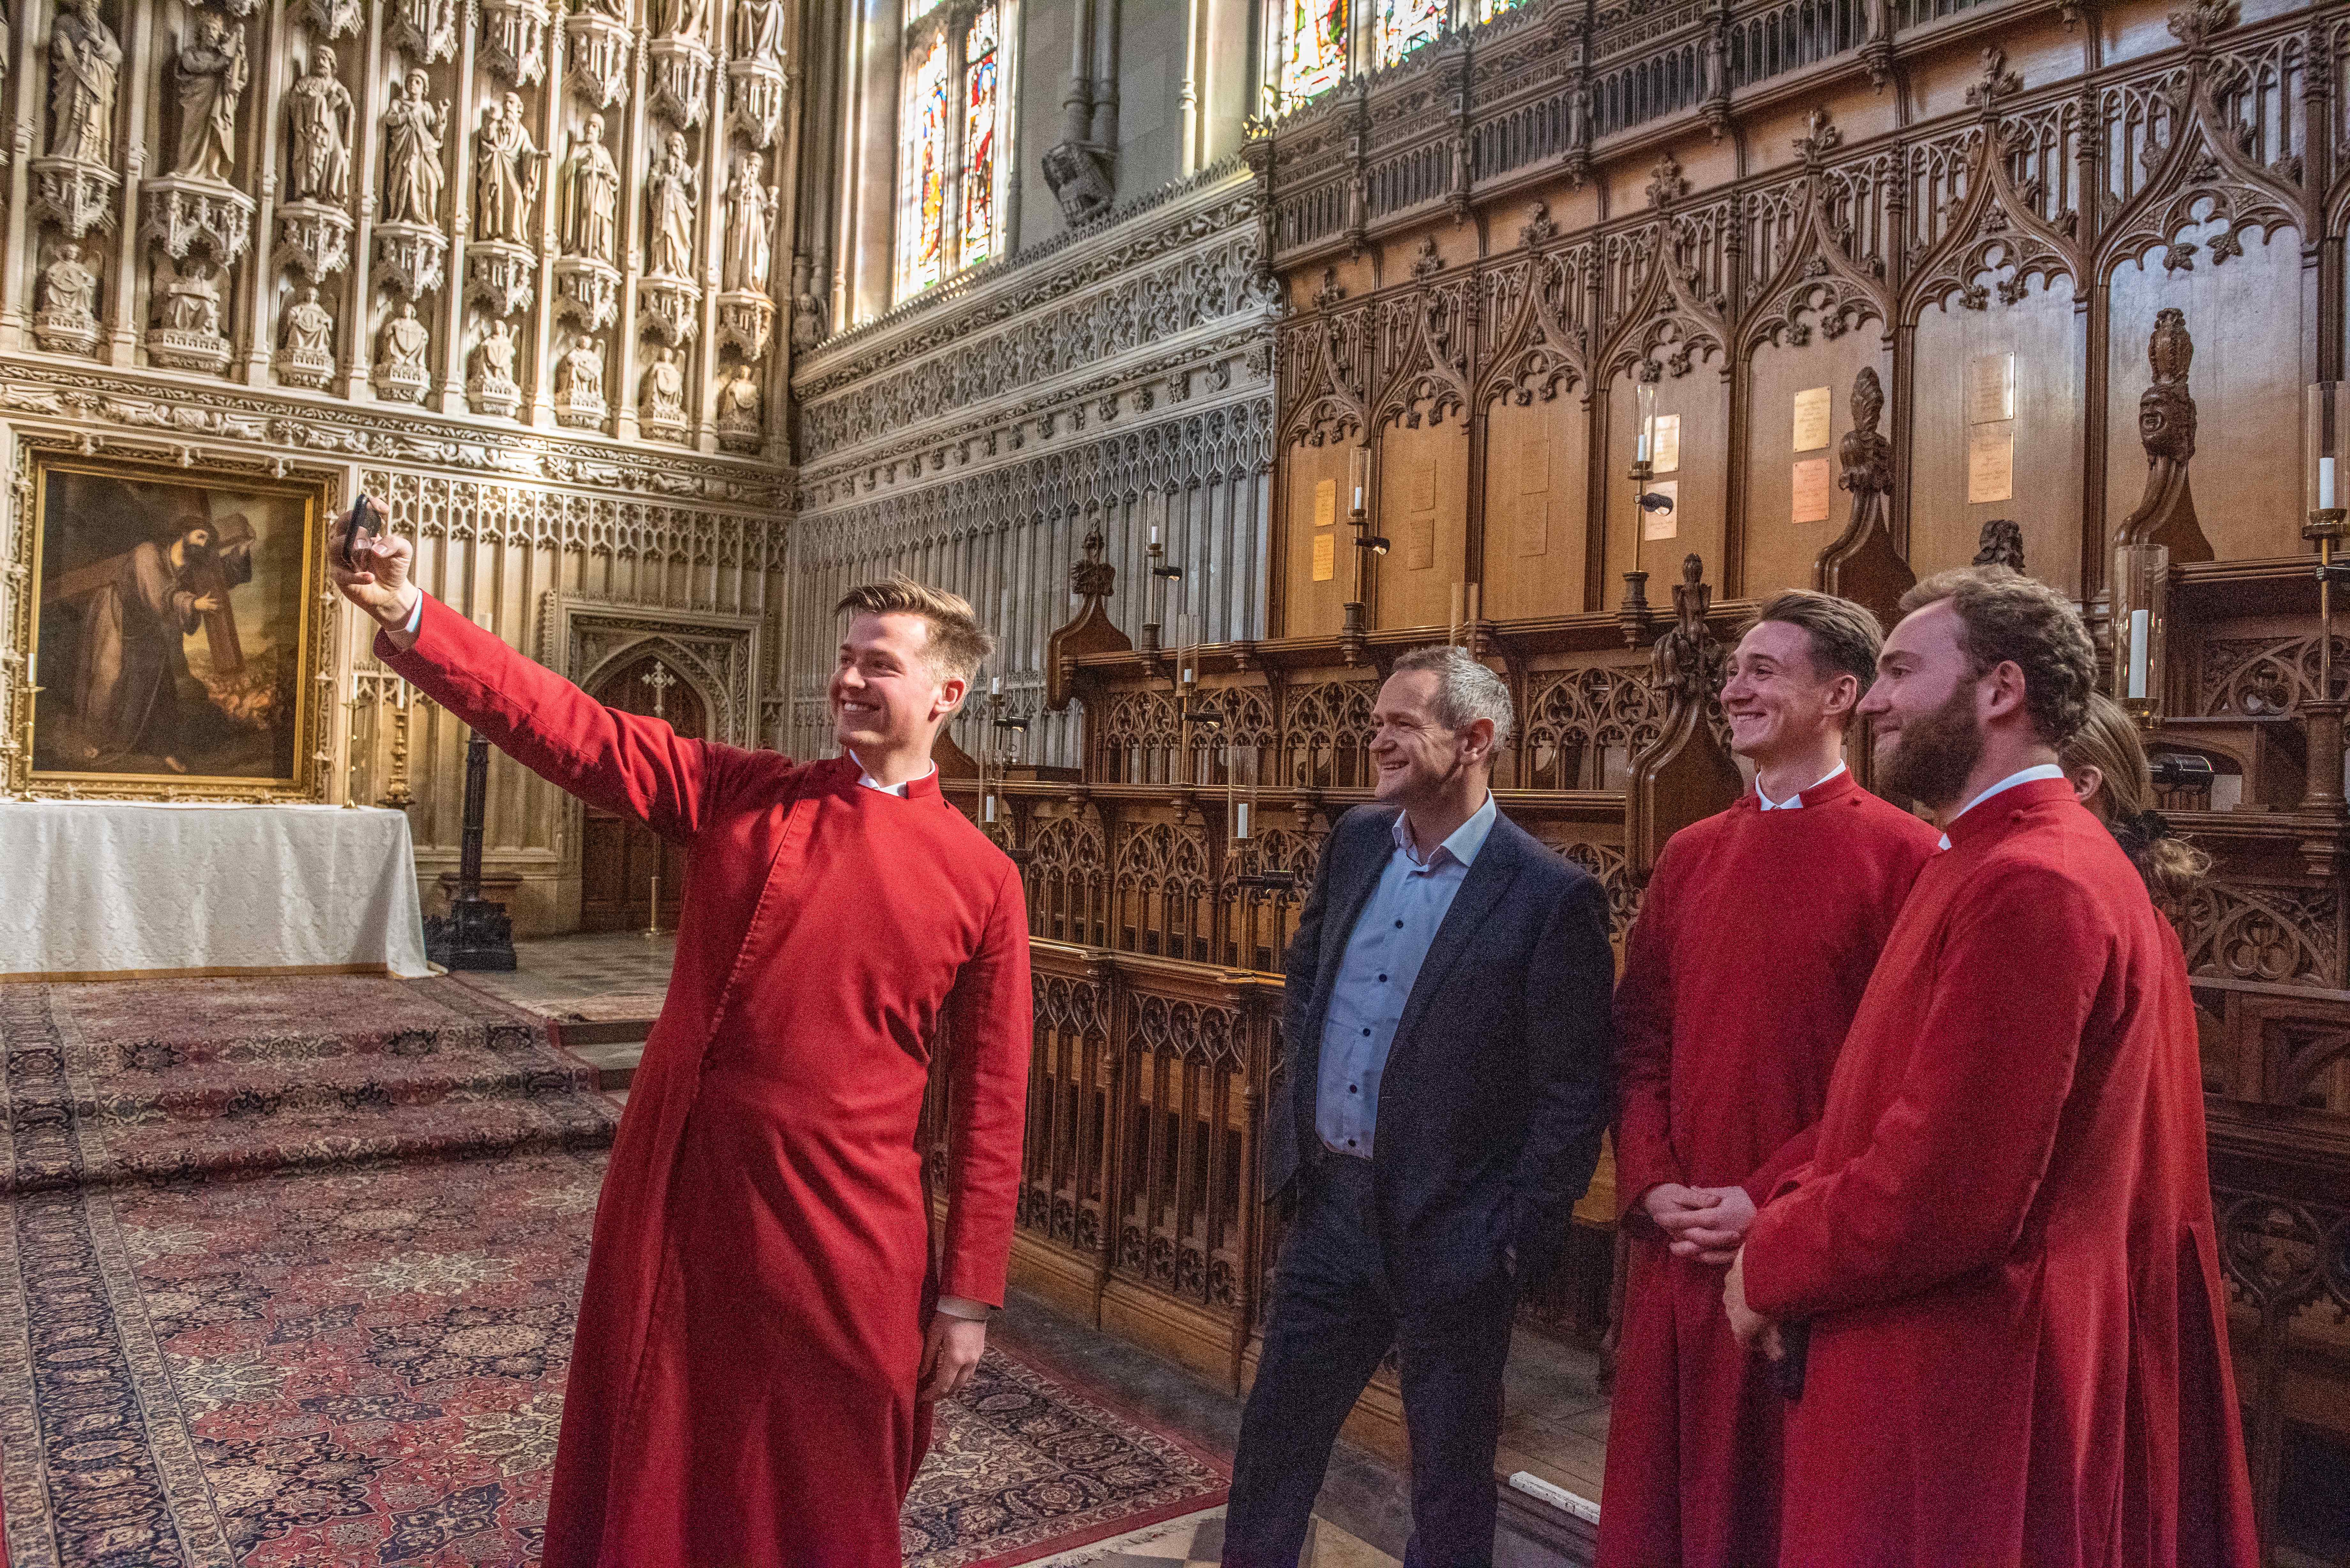 Choral scholars take a selfie with Alexander Armstrong